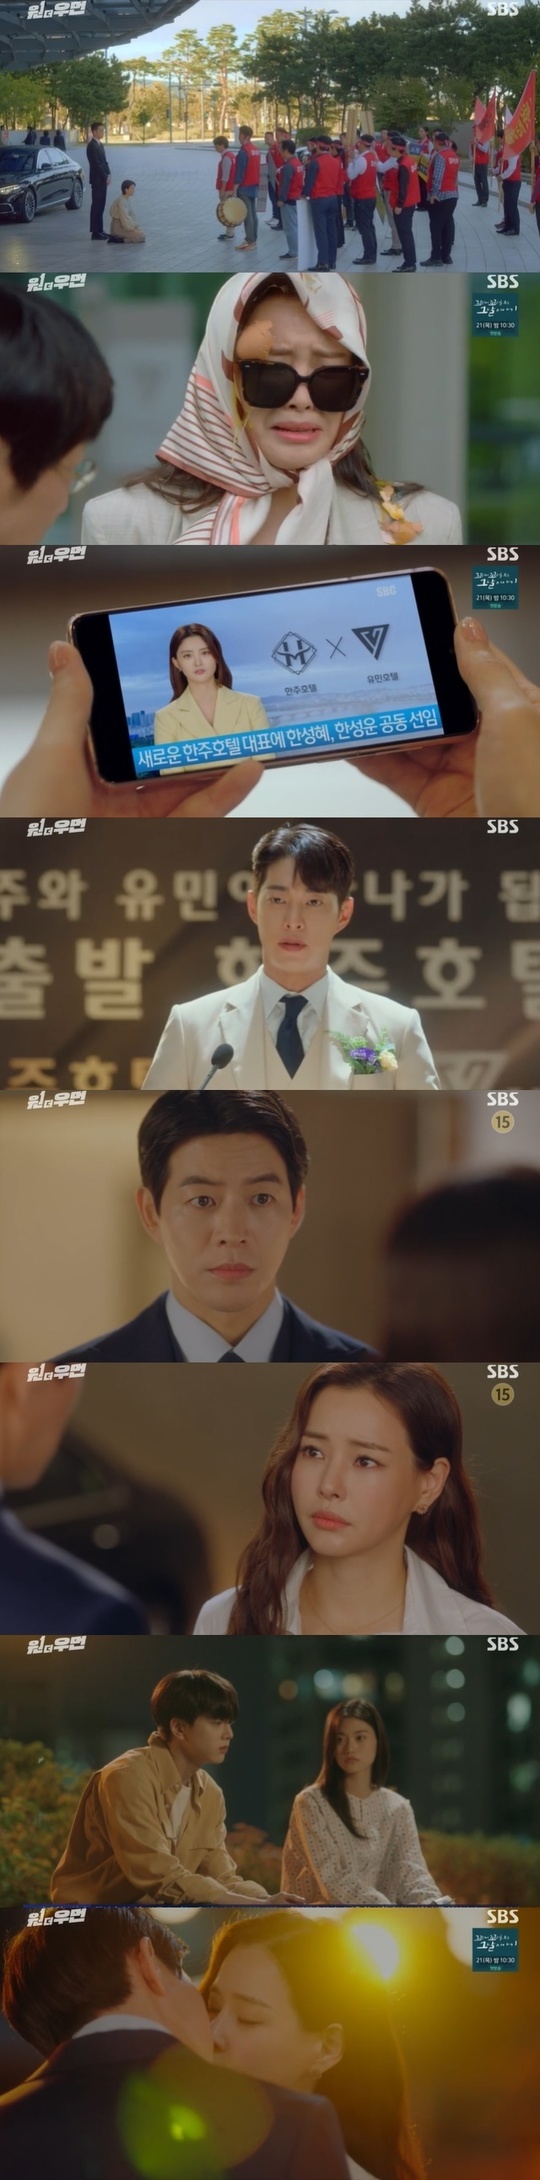 Lee Ha-nui, Lee Sang-yoon knew each others First Love past.In the 10th episode of SBS gilt drama One the Woman (playplayed by Kim Yoon and directed by Choi Young-hoon), which was broadcast on October 16, the figure of the supporting actor (Lee Ha-nui) who came out to find a real picture list was drawn.On this day, Ryu Seung-deok (Kim Won-hae) said, Lets finish the Lee Bong-sik (Kim Jae-young) case with Kang Mina (Lee Ha-nui).In three days, Kang Mina, chairman of the Central District Prosecutors Office, should appear. Ryu Seung-deok, who guessed that the connection occurred again in one week.Cho Yeon-ju also found out that a week was related to a three-way wave.Han Sung-hye (Jin Seo-yeon) behind all the work was excited to take over the Yuko Fueki Hotel.Han Sung-hye met with Han Seung-wook, the major shareholder of Yuko Fueki, and said, After the merger, hand over the sole representative director to me.If you refuse one thing, only Chairman Kang Mina will get tired, he threatened.Han Sung-hye was satisfied with the Hansung-book, which left without any refutation, and immediately prepared for the restructuring of the employees.Han seung-wook realized that the incident was similar to the death of his father 14 years ago.At that time, Han Seung-wooks father died, and Han Young-sik (National Hwan) convened an emergency board meeting at dawn, and Han Seung-wooks fathers Hanju Hotel was merged into a one-week fashion.At that time, the Hanju Hotel was owned by Han Sung-hye.Later, Han Seung-wook met Kim Isa (Kim Kyung-shin, Je Su-jeong).Kim confessed to Han Seung-wook that he had been a double spy between Han Seung-wooks father and Han Young-sik in the past, and Han Young-sik told Han Young-hye that he could hold han seung-wooks hand at any time.It was also Han Young-siks suggestion. Han Seung-wook tried to answer something, but Kim said, If you listen, you have to deliver it again.On the other hand, Ryu Seung-deok witnessed Chos return to work in the car of Noh Hak-tae (Kim Chang-wan), confirming that the car was a Hanju Group corporation.Ryu Seung-deok had previously tied up Ahn Yoo-joon (Lee Won-geun), who handed him a picture of Kang Mina with sunglasses, and was worried about how they were related to one week.Han Sung-hye made a kneeling show in front of them when the restructuring employees protested in front of the Hanju Hotel.Han Sung-hye said, We are in a position to be merged and we have to re-examine Yuko Fueki, and now we demand a large-scale restructuring. He turned all responsibility to Yuko Fueki Hotel and Kang Mina.The staff changed the sit-in to Yuko Fueki Hotel, not one-week hotel, where the unknowing supporting actress was baptized while trying to cover her face and go to work at the company.This work came back to the supporting actor, and han seung-wook (Song Won-seok) was so hot that he sued the person who threw the egg instead of the supporting actor, and became the work of the prosecutors supporting actor.Since then, Cho has faced the person who threw the egg at him, and learned about the back work of Han Sung-hye and the unfortunate situation of the dismissed characters.Cho Yeon-ju went straight to Hansung-wook and asked if he knew about the restructuring and accused him of not unlike a week.Han Seung-wook said: Its hard to reject on this side.I am worried about the supporting actor, but I could not get to the supporting actor, saying, If you tell me that you are arrested by Kang Mina in a week with the prosecution.Han well-wook then found Han Young-sik based on the advice of Kim.Han Seung-wook handed out a 10% stake in Yuko Fueki Electronics to Han Young-sik and said, Yuko Fueki Group is in trouble because of Lee Bong-siks list.And there is a small condition for the merger, do not you care? So Han Young-sik also gave Han Seung-wook some condition.Soon the proposal of Han seung-wook was revealed.Hanju Hotel and Yuko Fueki Hotel merger will be announced, and Han Sung-hye and han seung-wook (Song Won-seok) will be appointed as co-representatives, followed by conditions for full employment succession.Han Sung-hye was angry at the merger conditions that he did not know, but Han Young-sik was only satisfied that he was able to take the power of Han Seung-wook from Yuko Fueki Electronics.Cho Yeon-ju saw the merger meeting of han seung-wook and found out that han seung-wook made this choice for himself and another important fact.Cho Yeon-ju ran to han seung-wook and said that he had already heard this 14 years ago, referring to what he had heard from his past father at the merger meeting.Cho Yeon-ju said 14 years ago that he was me rather than Kang Mina, who met at the hospital, and Han Seung-wook also realized that I know now.Do you really care who I am? said Cho. Han Seung-wook said, I really love .They kissed without a drink this time.